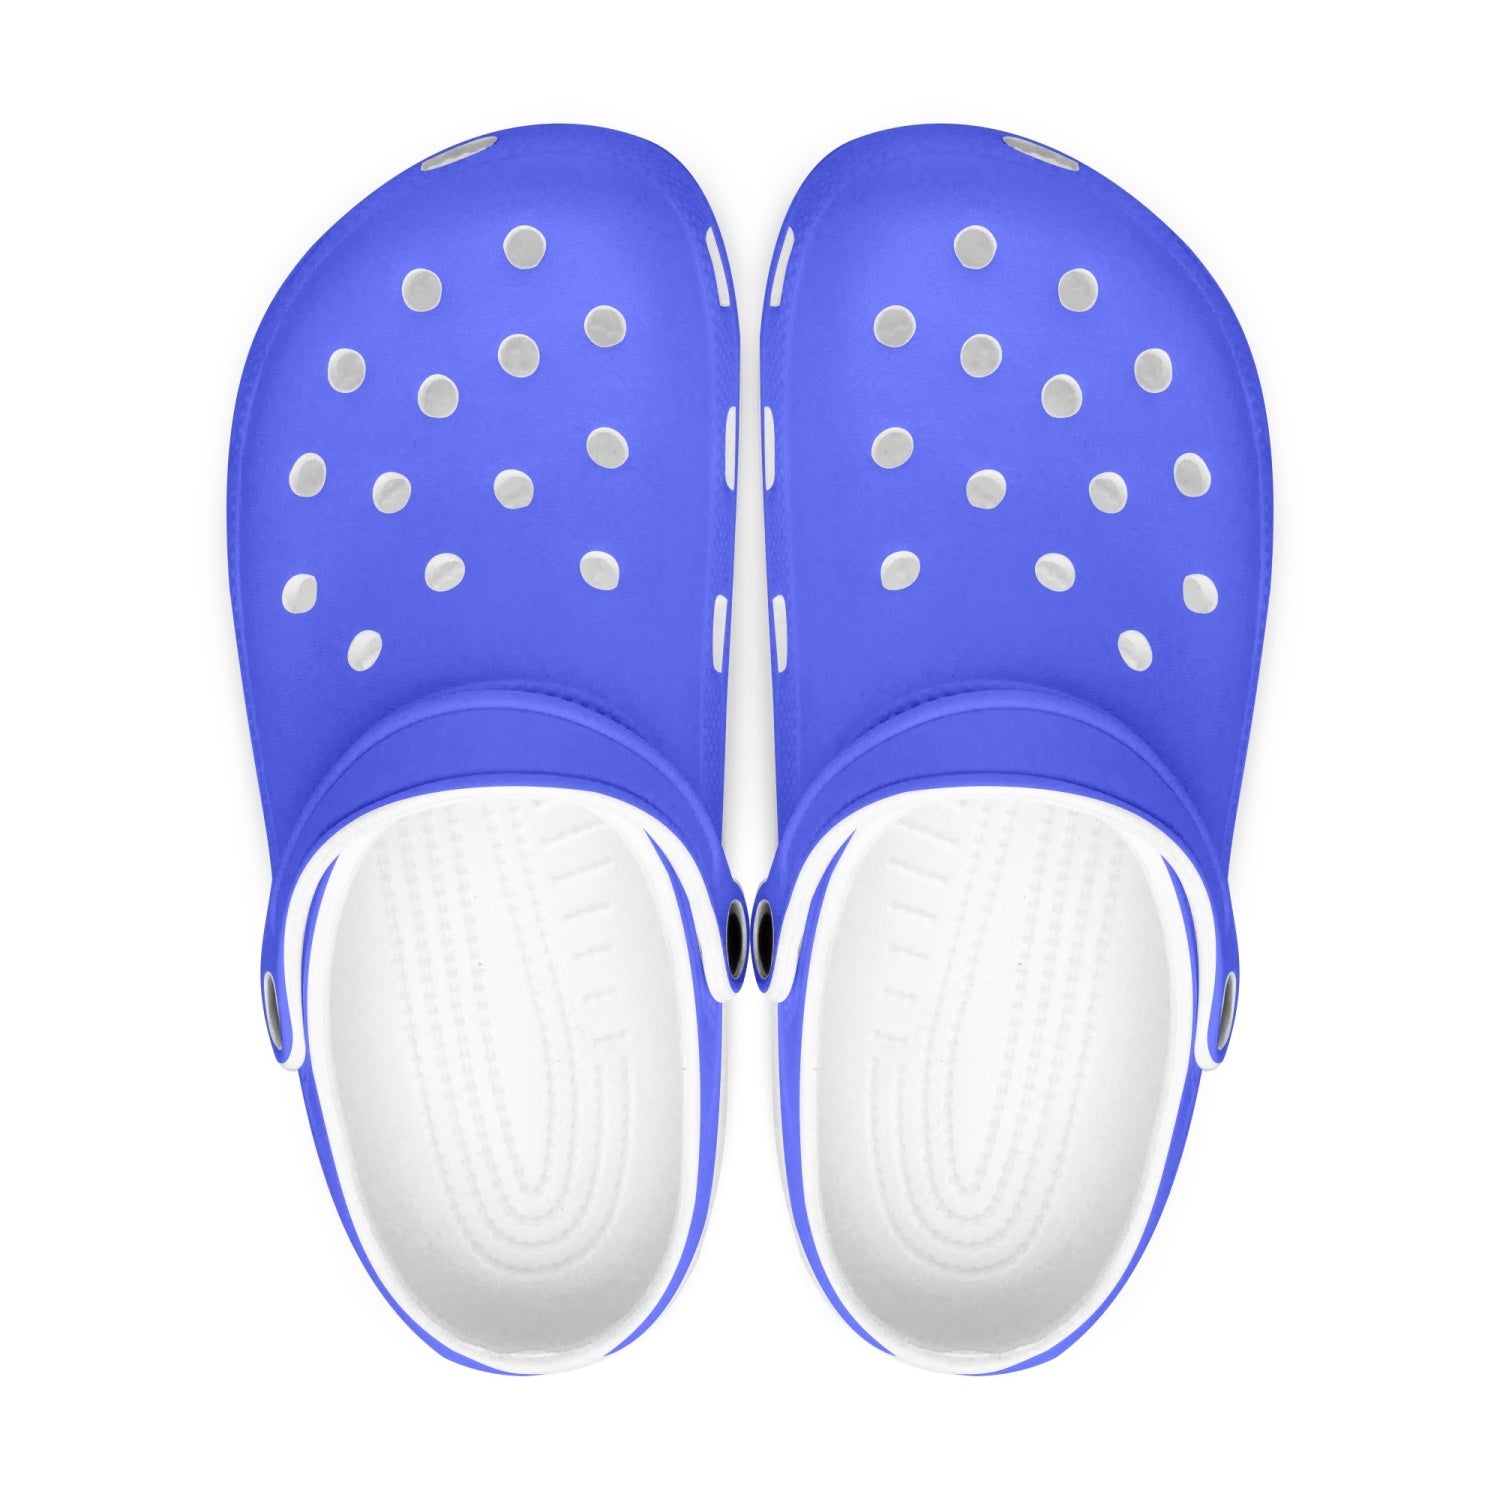 Bright Blue Color Unisex Clogs, Best Solid Blue Color Classic Solid Color Printed Adult's Lightweight Anti-Slip Unisex Extra Comfy Soft Breathable Supportive Clogs Flip Flop Pool Water Beach Slippers Sandals Shoes For Men or Women, Men's US Size: 3.5-12, Women's US Size: 4-12